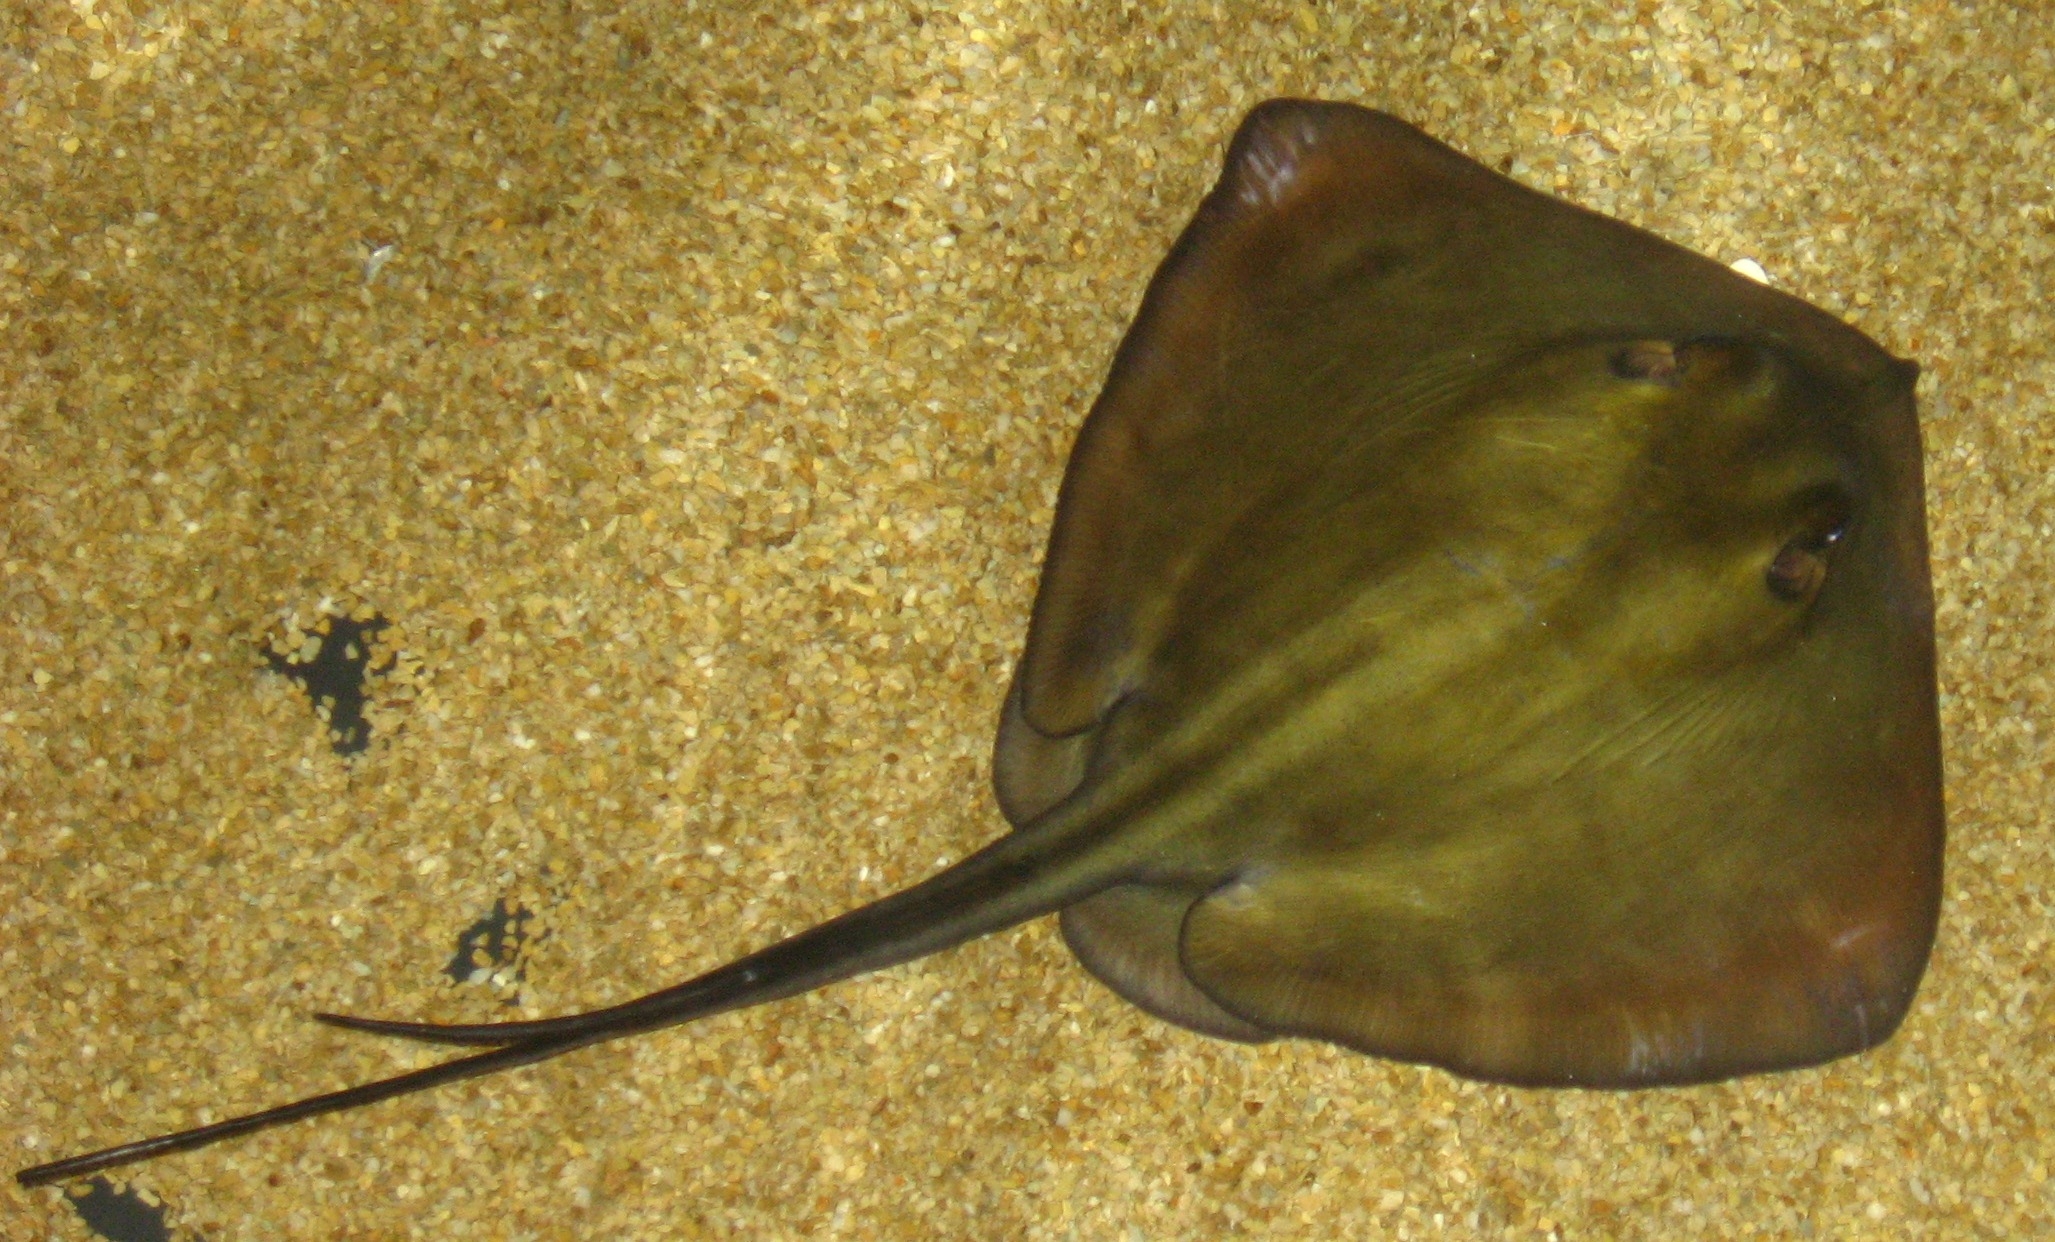 Dasyatis_pastinaca_c_Line1 (c) The number of different shark and ray species in areas with high trawling is up to 69% lower (Picture of Common Stingray) (c) Liné1